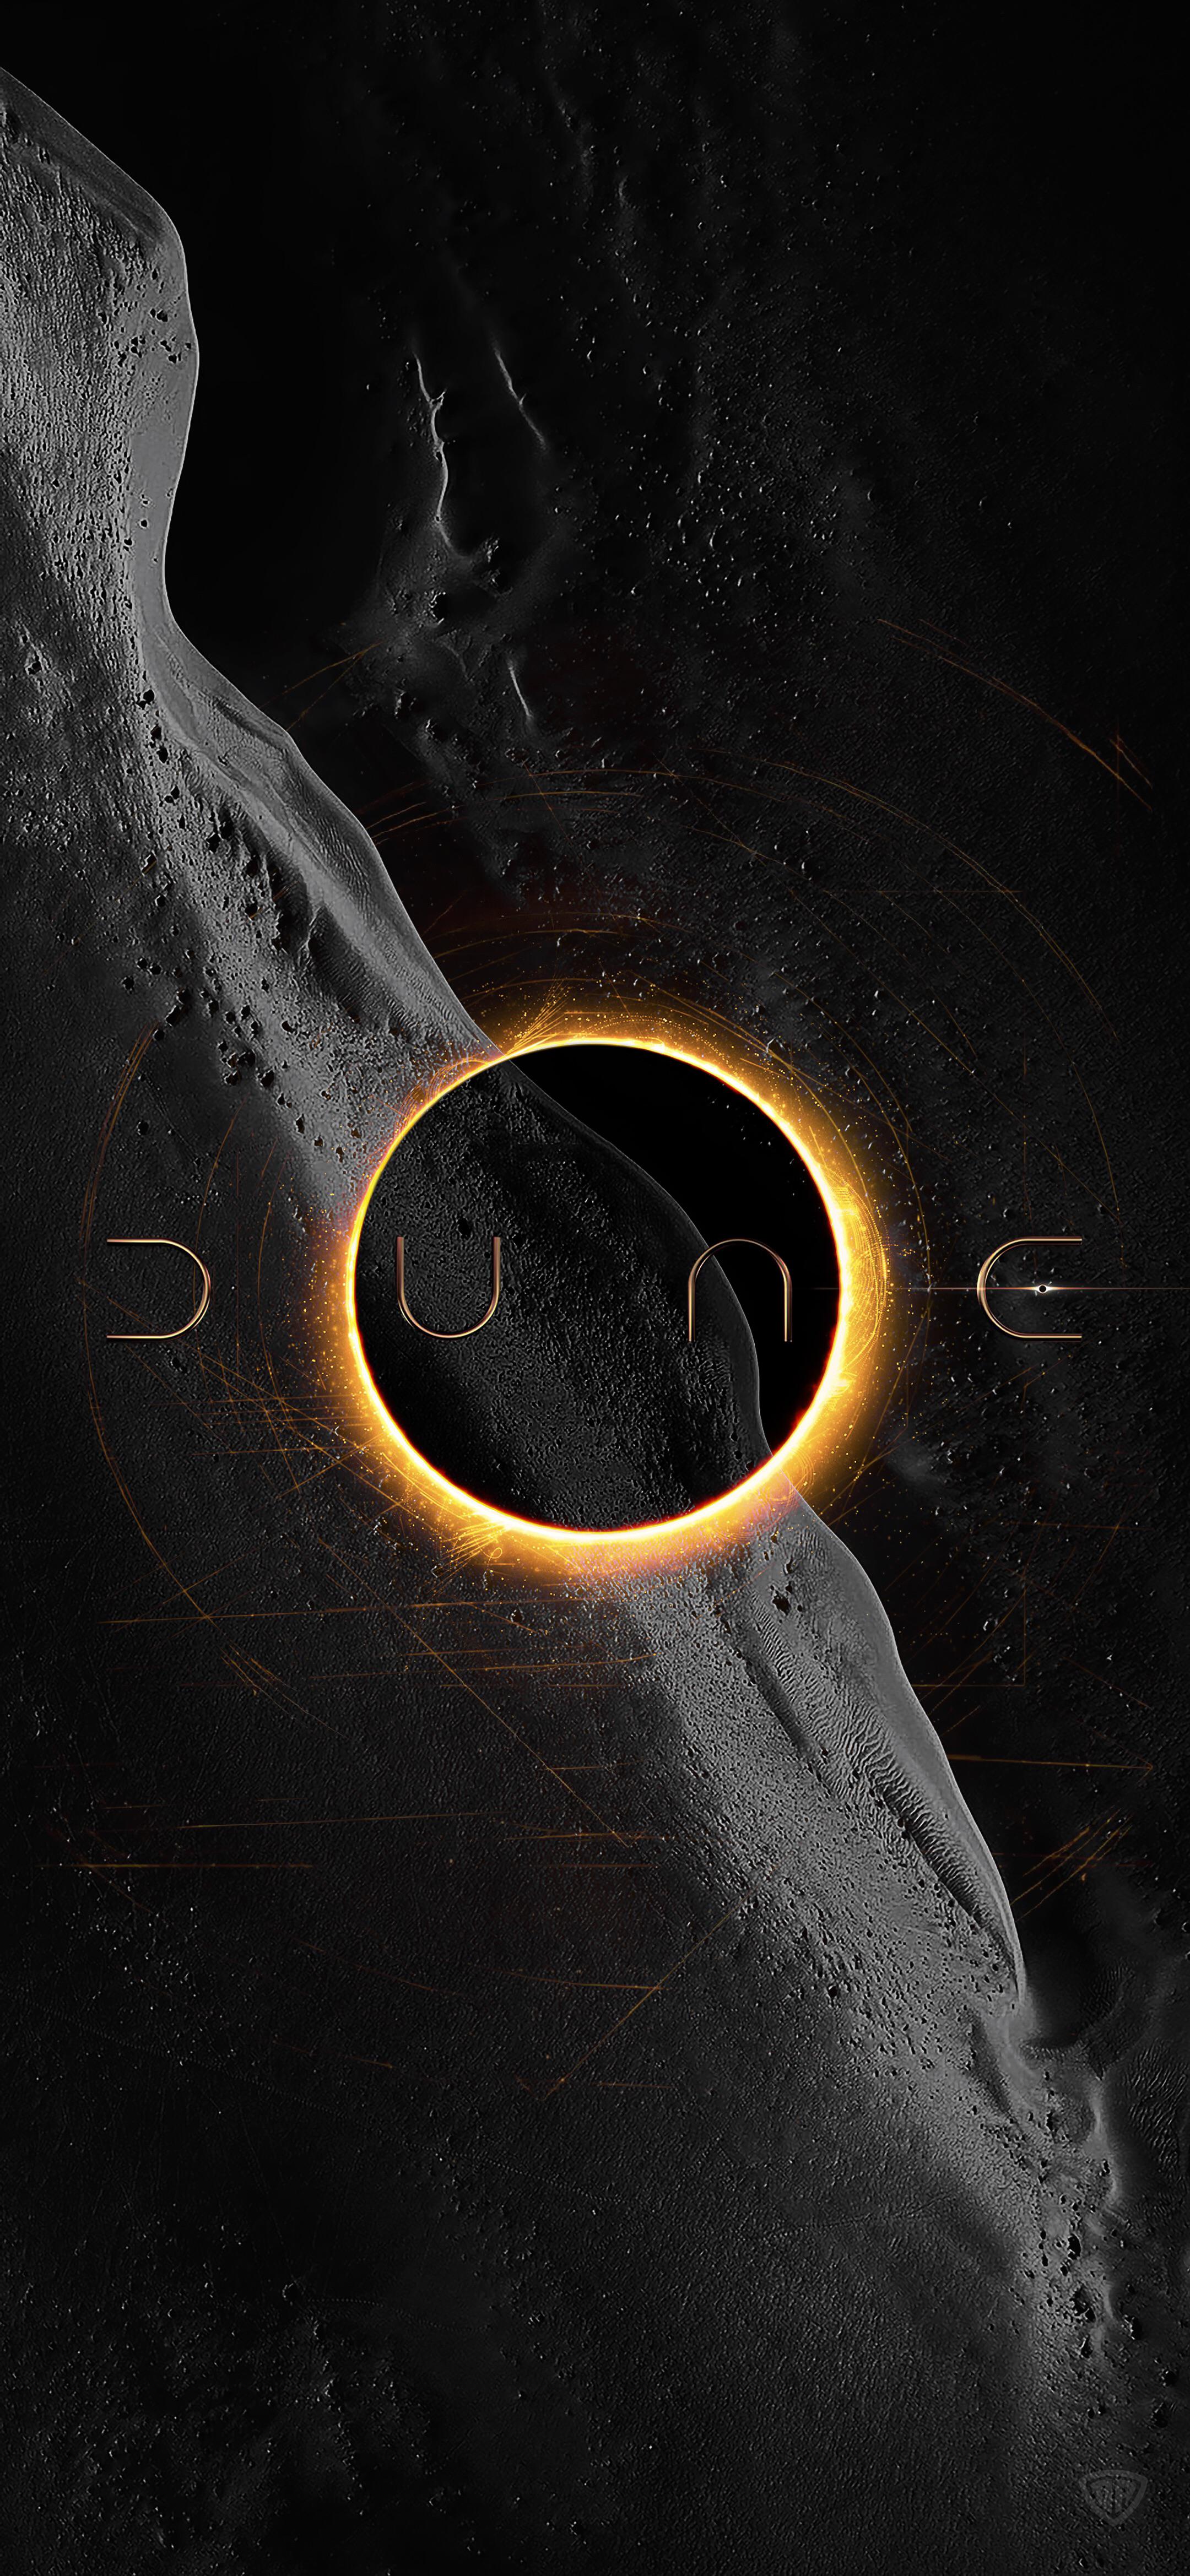 Yesterday I posted some Dune wallpaper, here are the mobile sizes. Again, feel free to use!